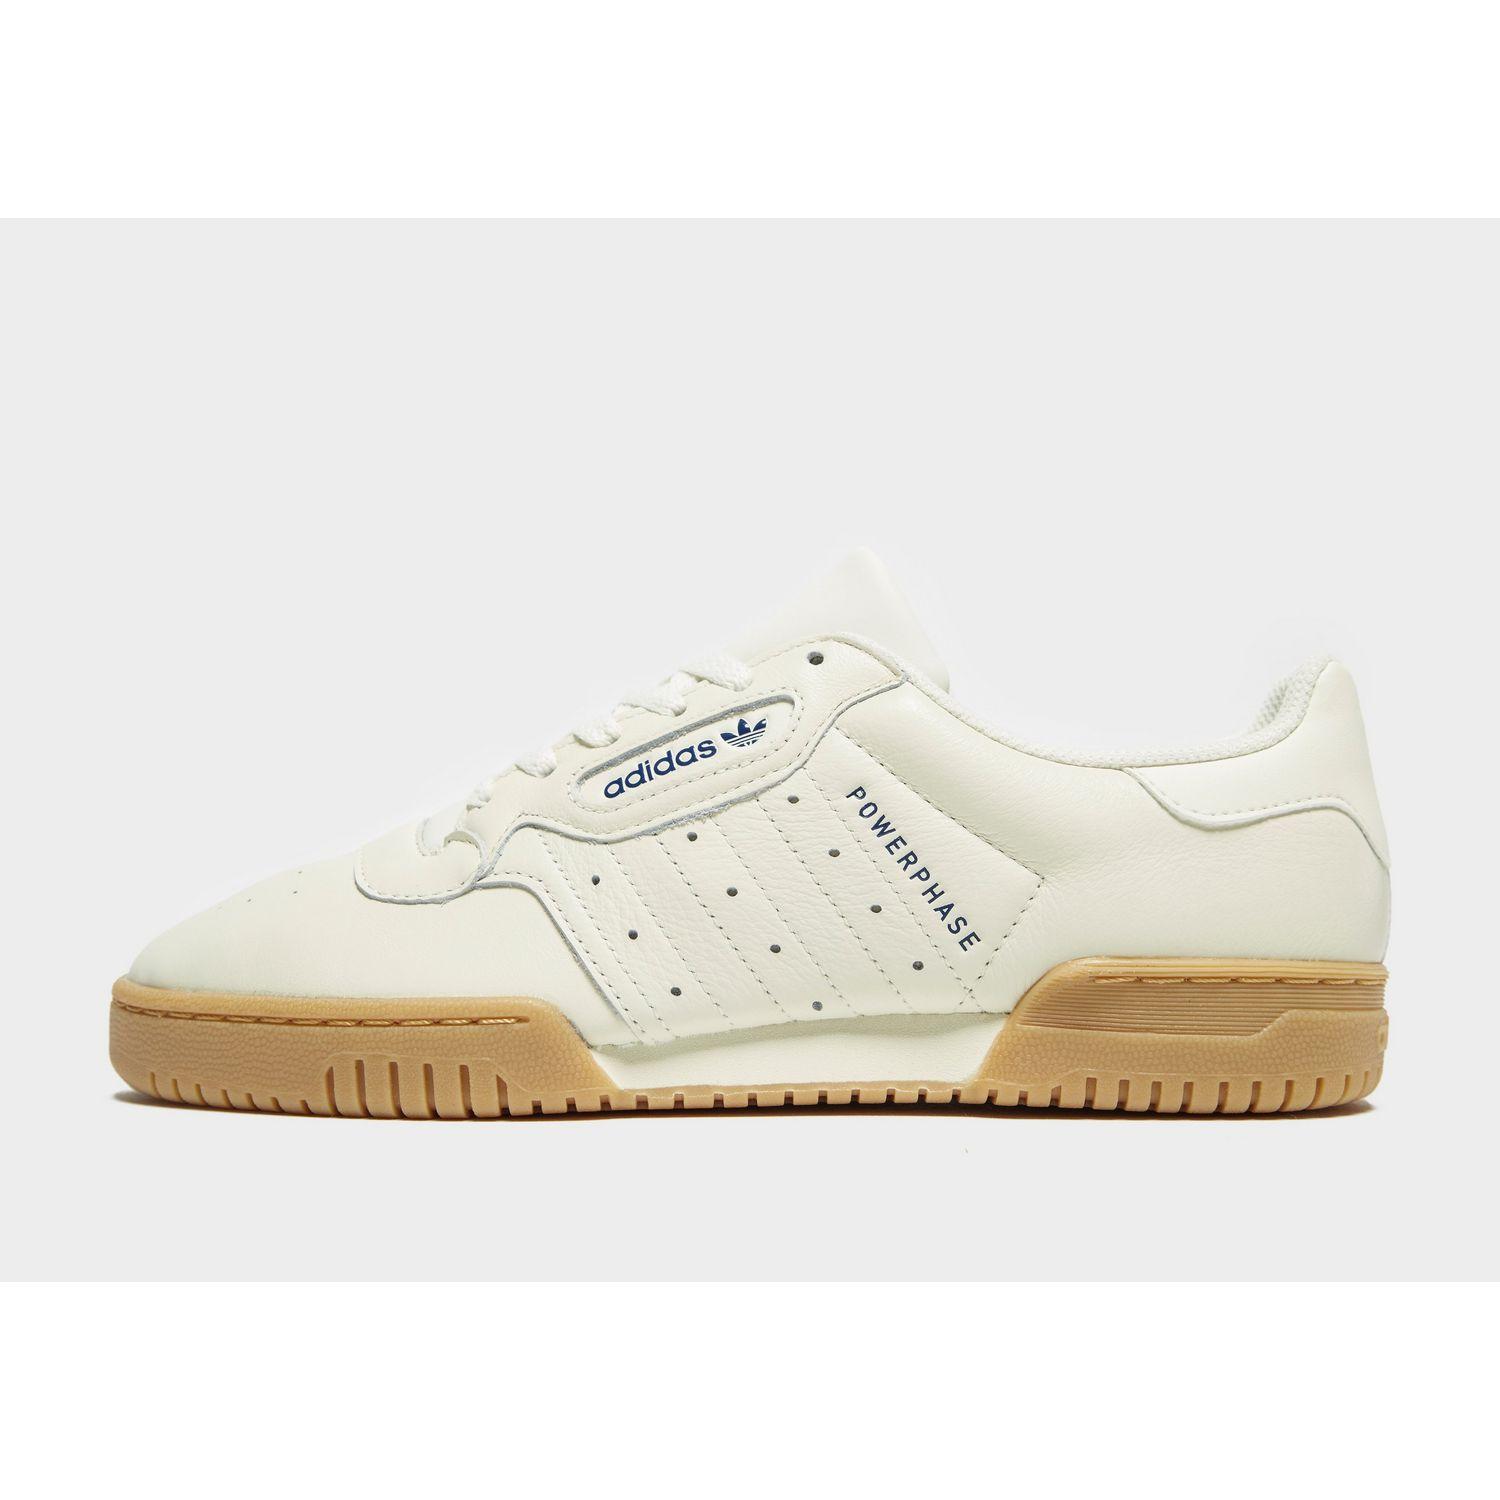 adidas originals powerphase trainers in off white leather with gum sole